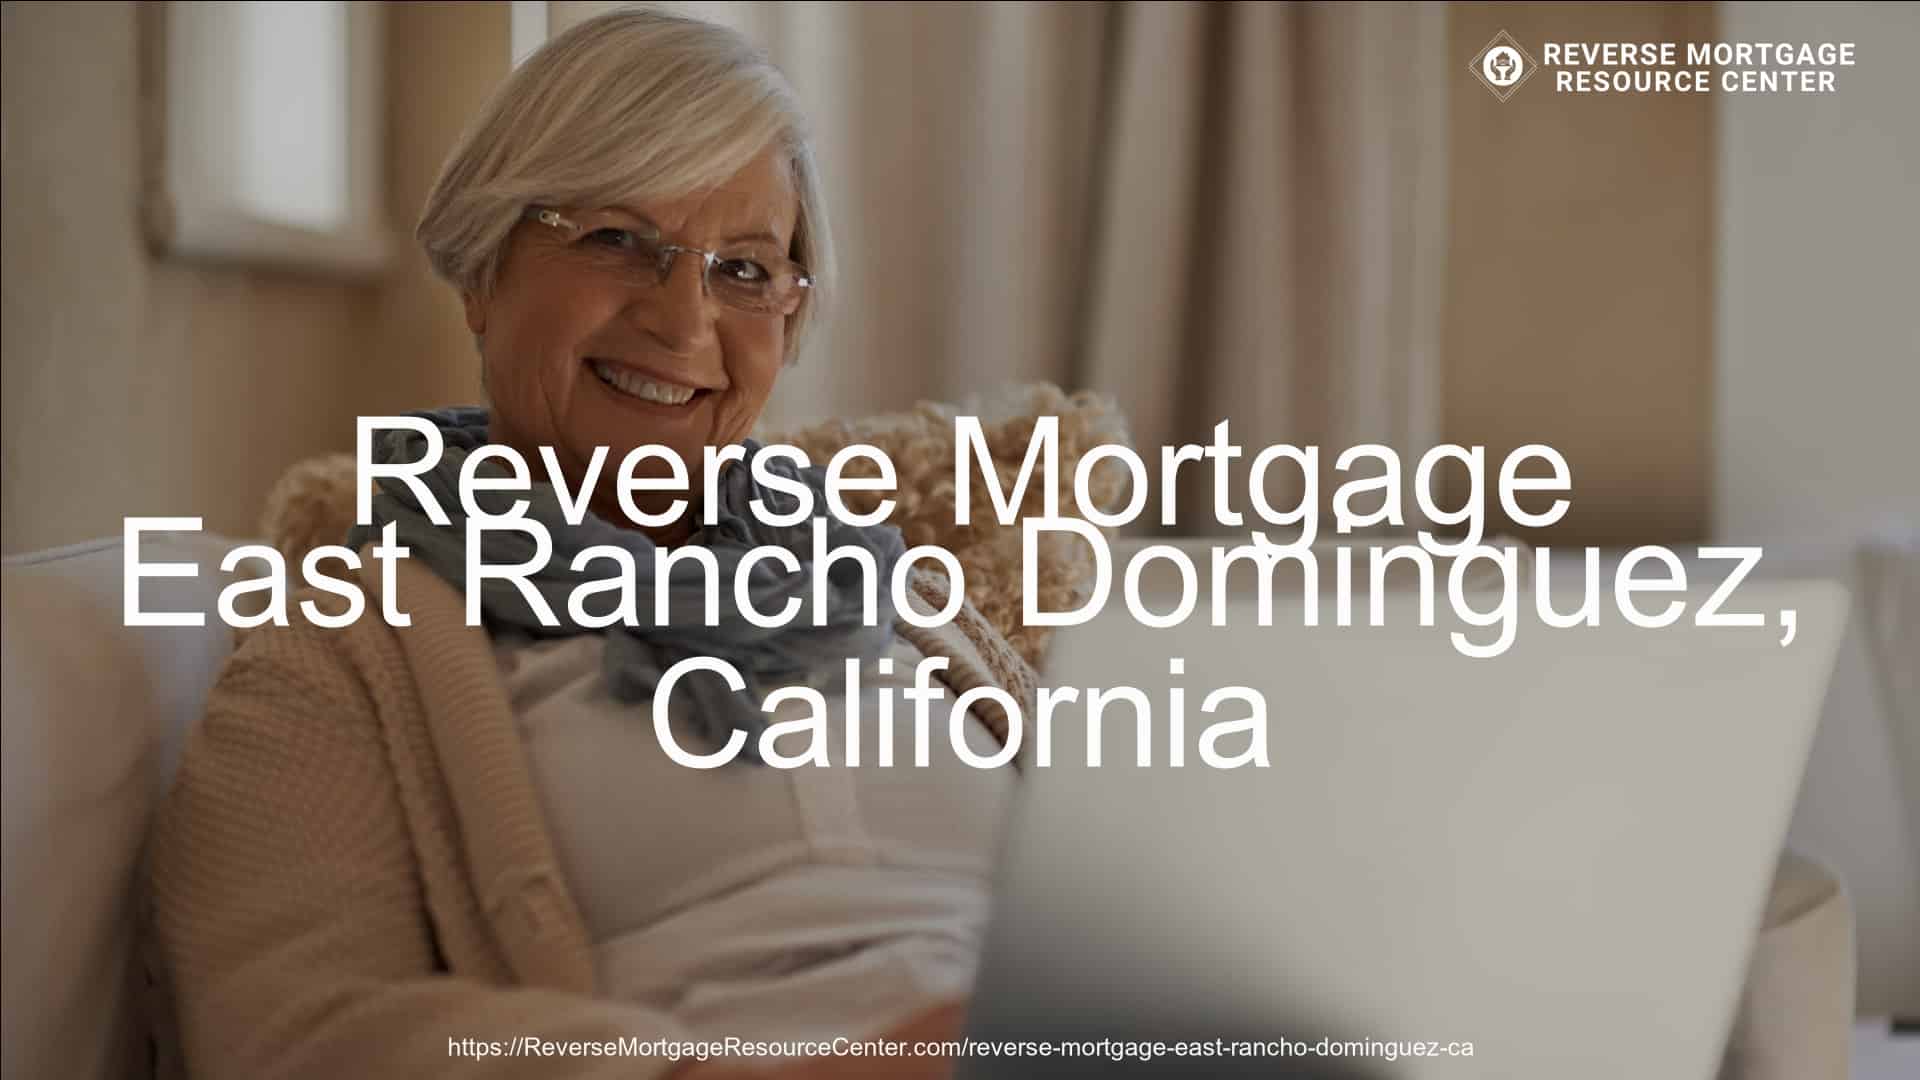 Reverse Mortgage in East Rancho Dominguez, CA